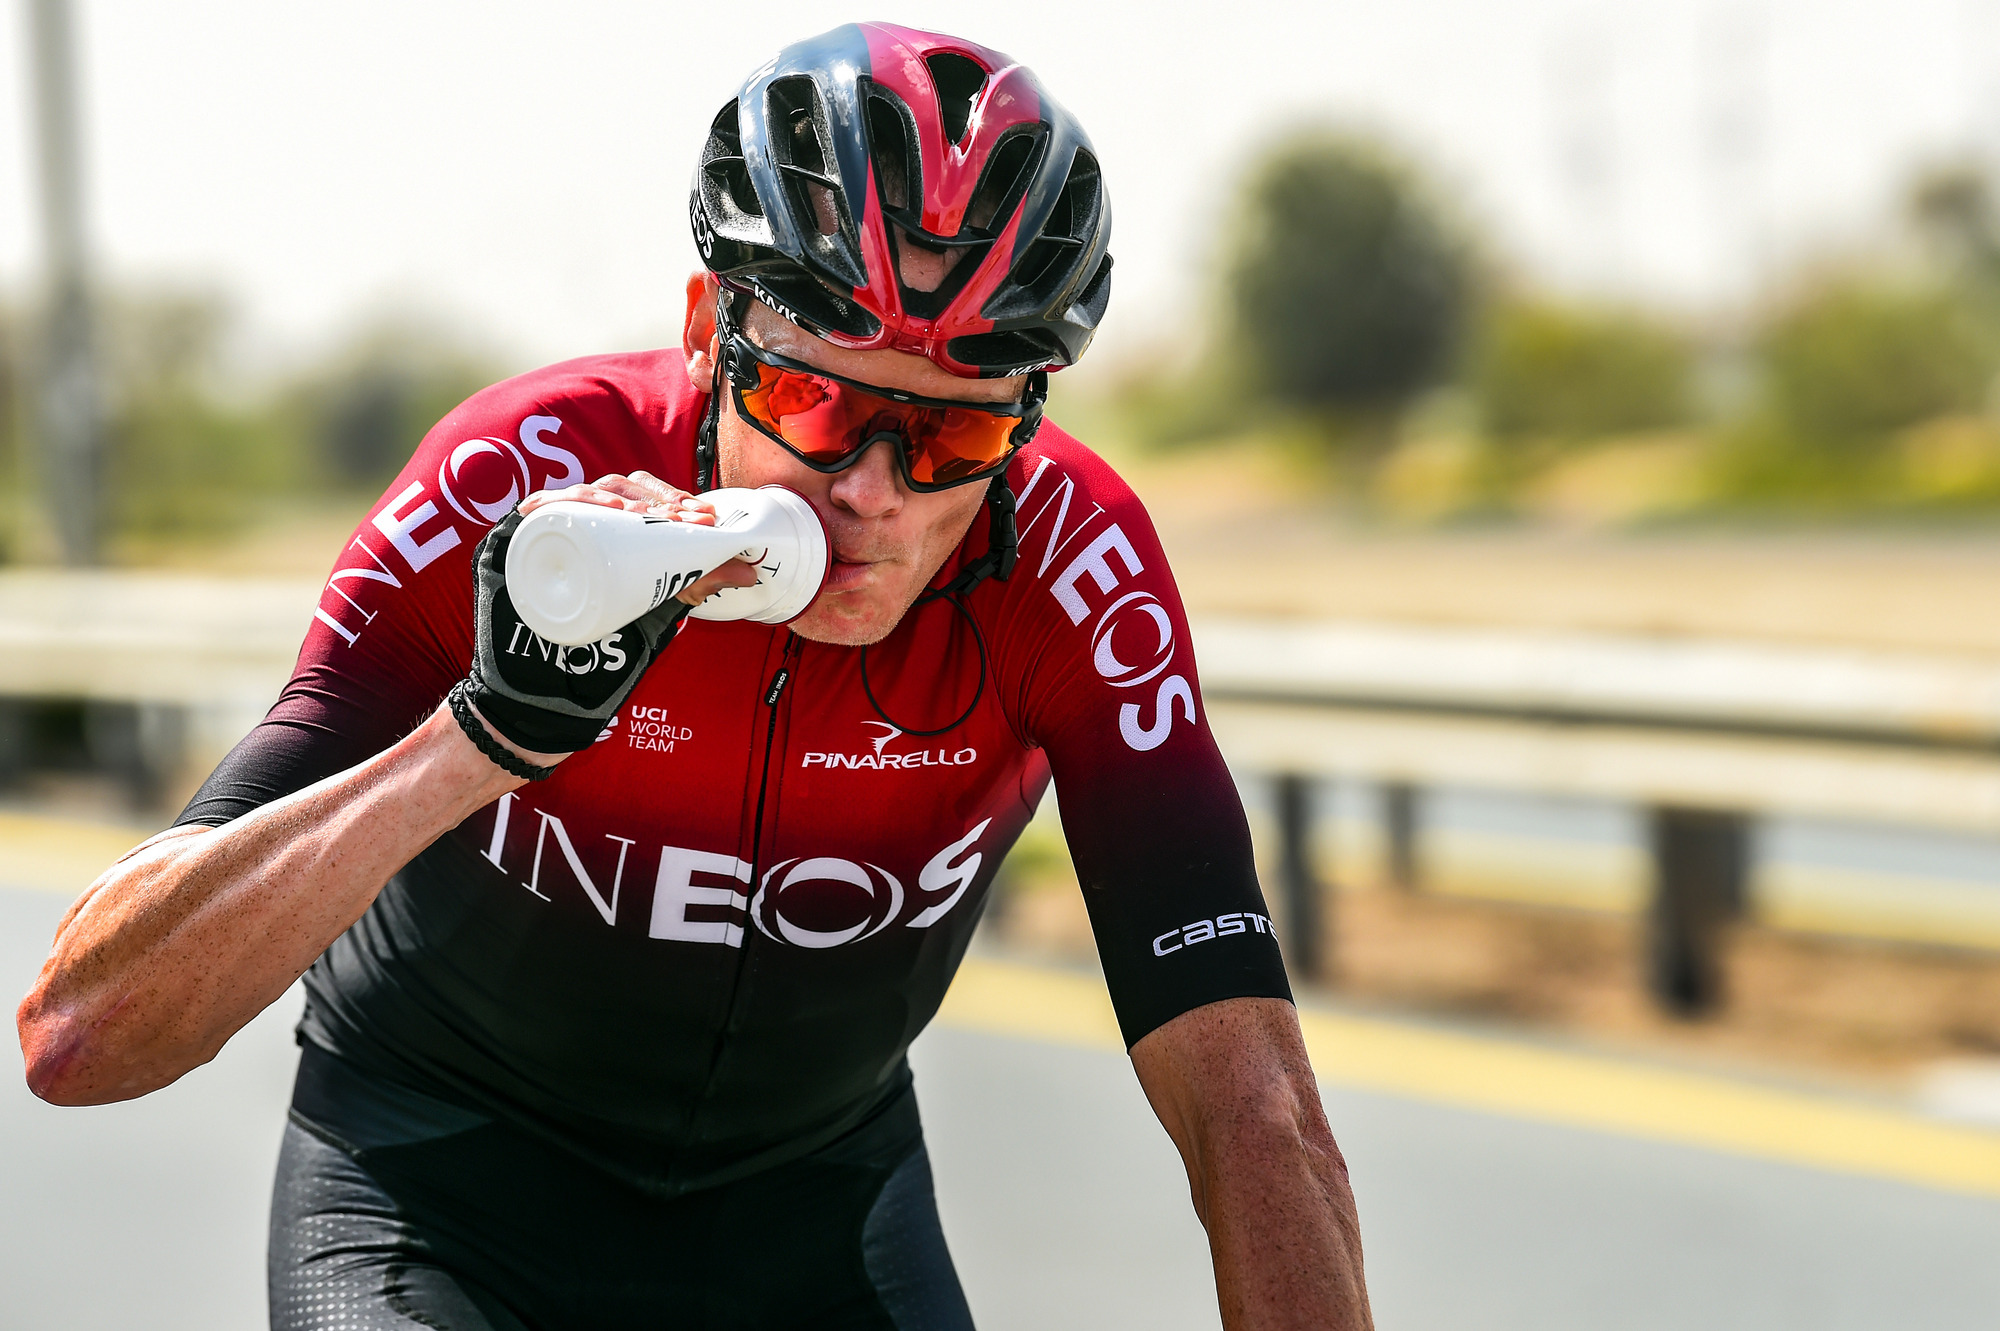 Team Ineos to be known as the Ineos Grenadiers for Tour de France